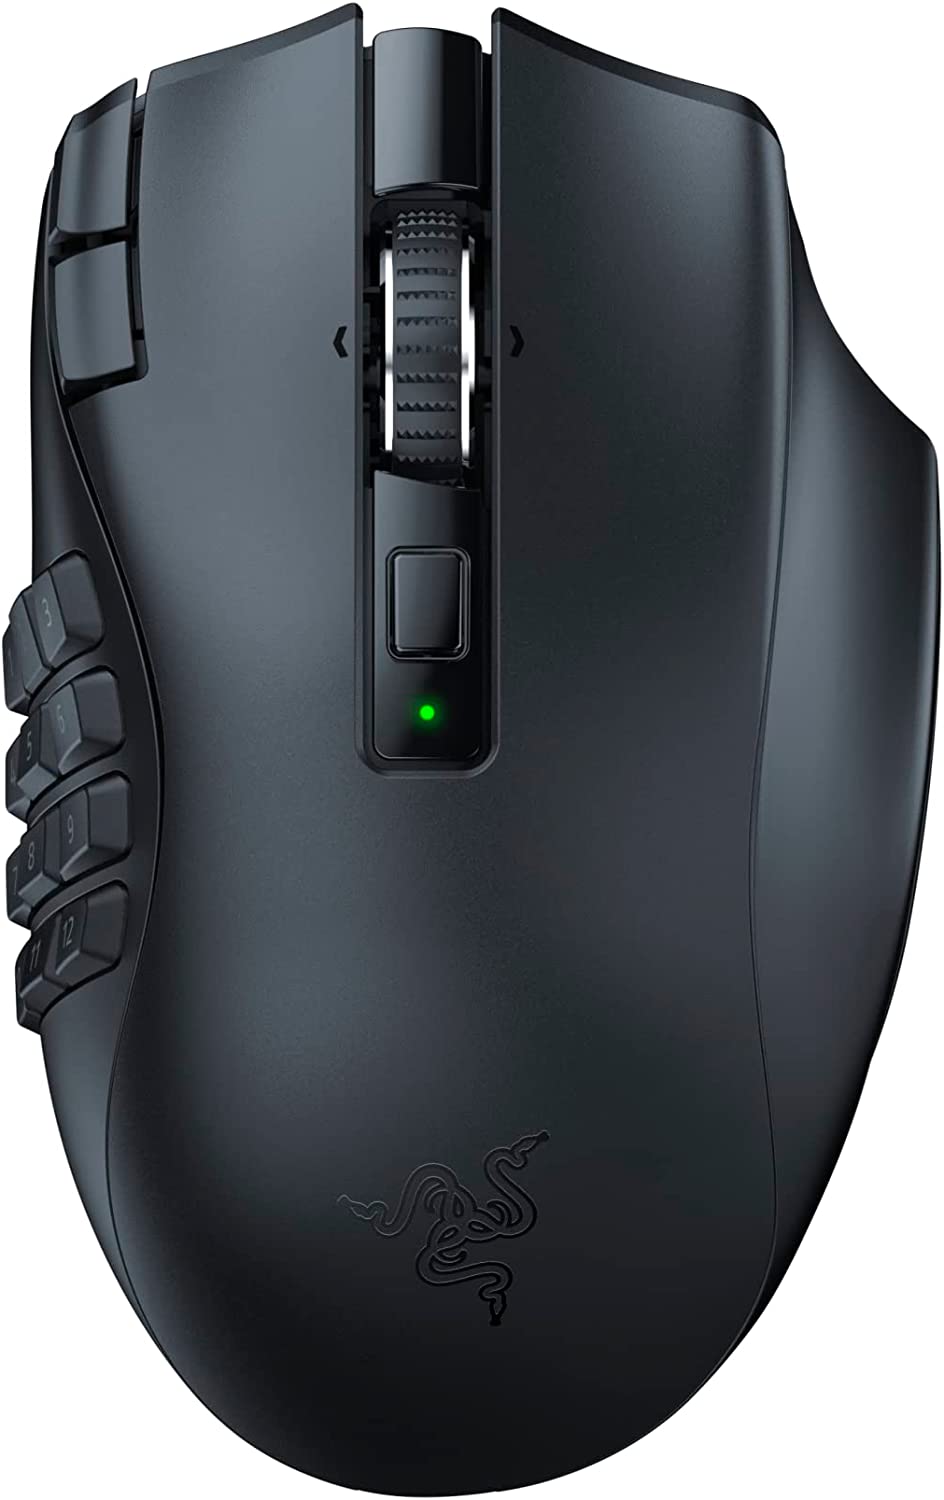 Razer Naga V2 HyperSpeed Ergonomic Wireless MMO Gaming Mouse with 19 Programmable Buttons - Black